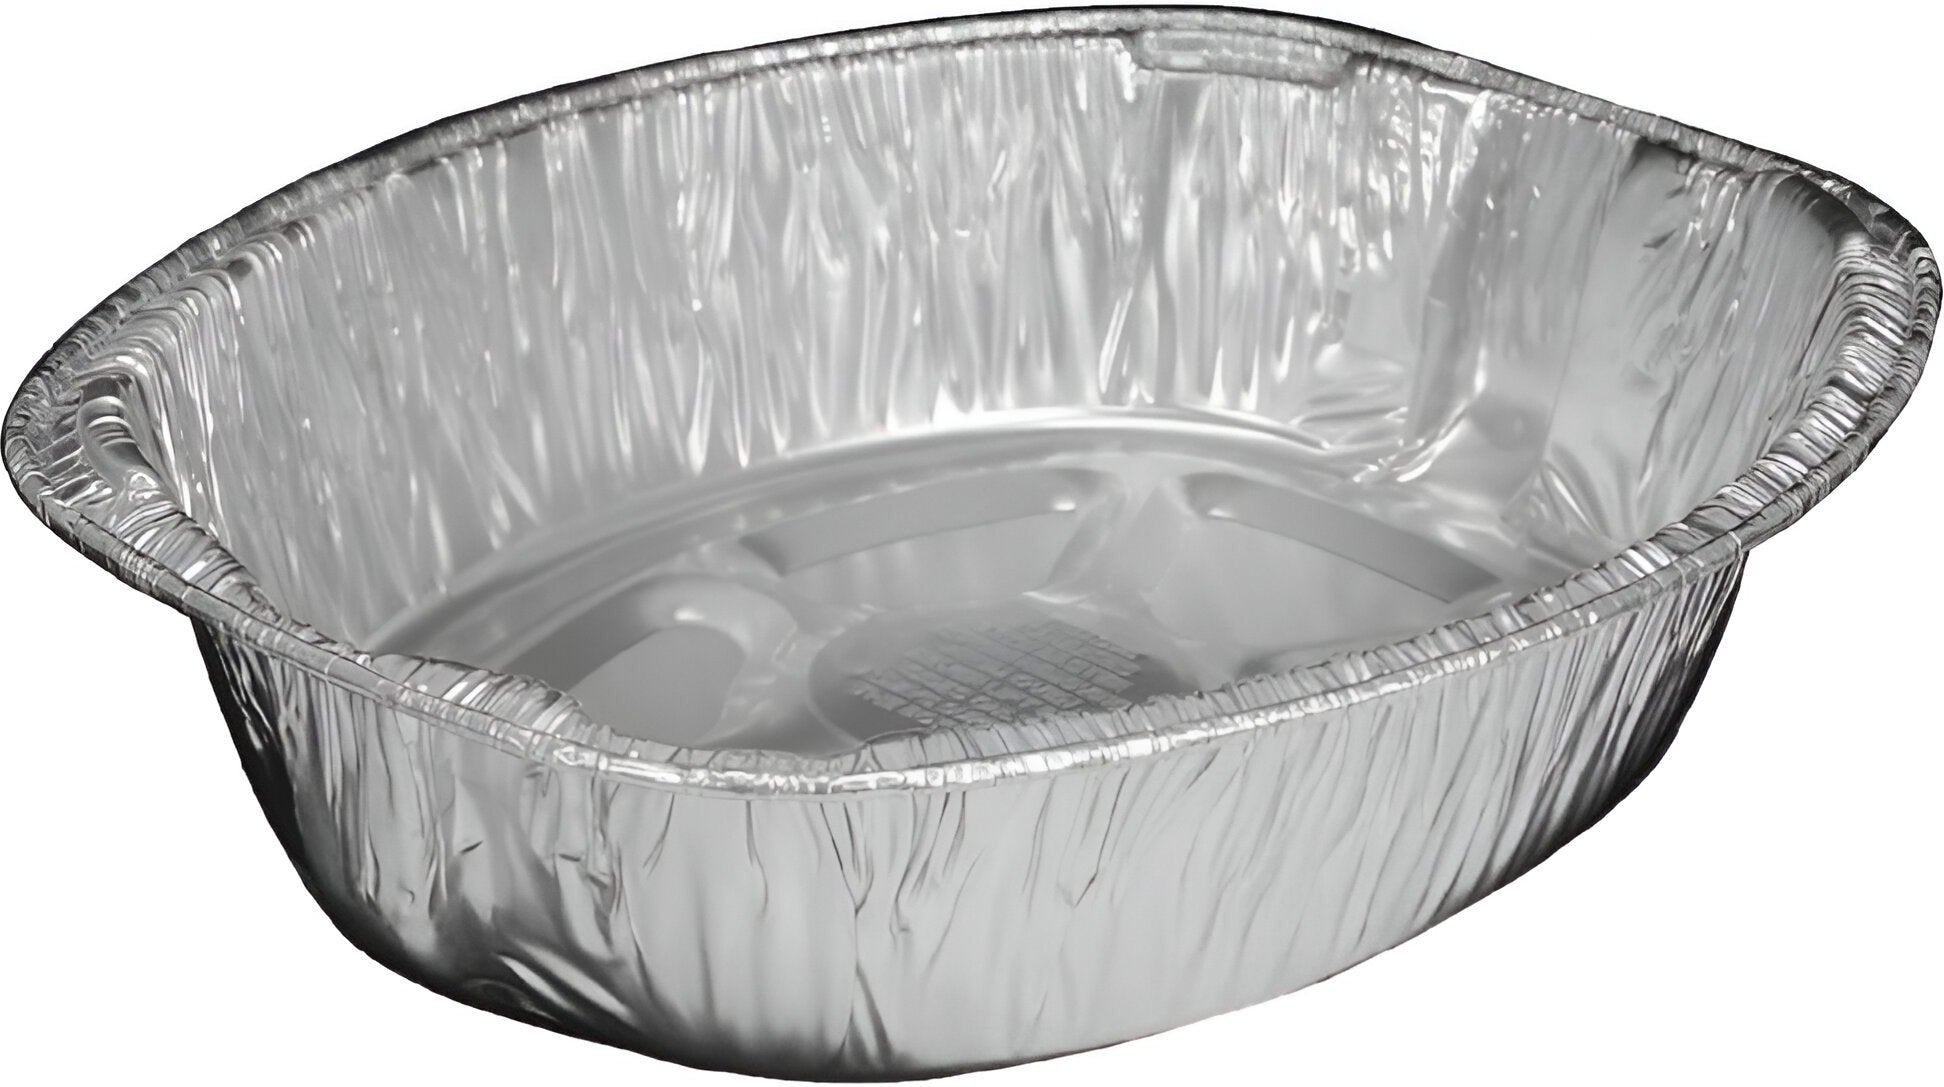 HFA - 10.81" x 8.41" Small Oval, 160 Oz Foil Containers, 100/Cs - 2200-00-100